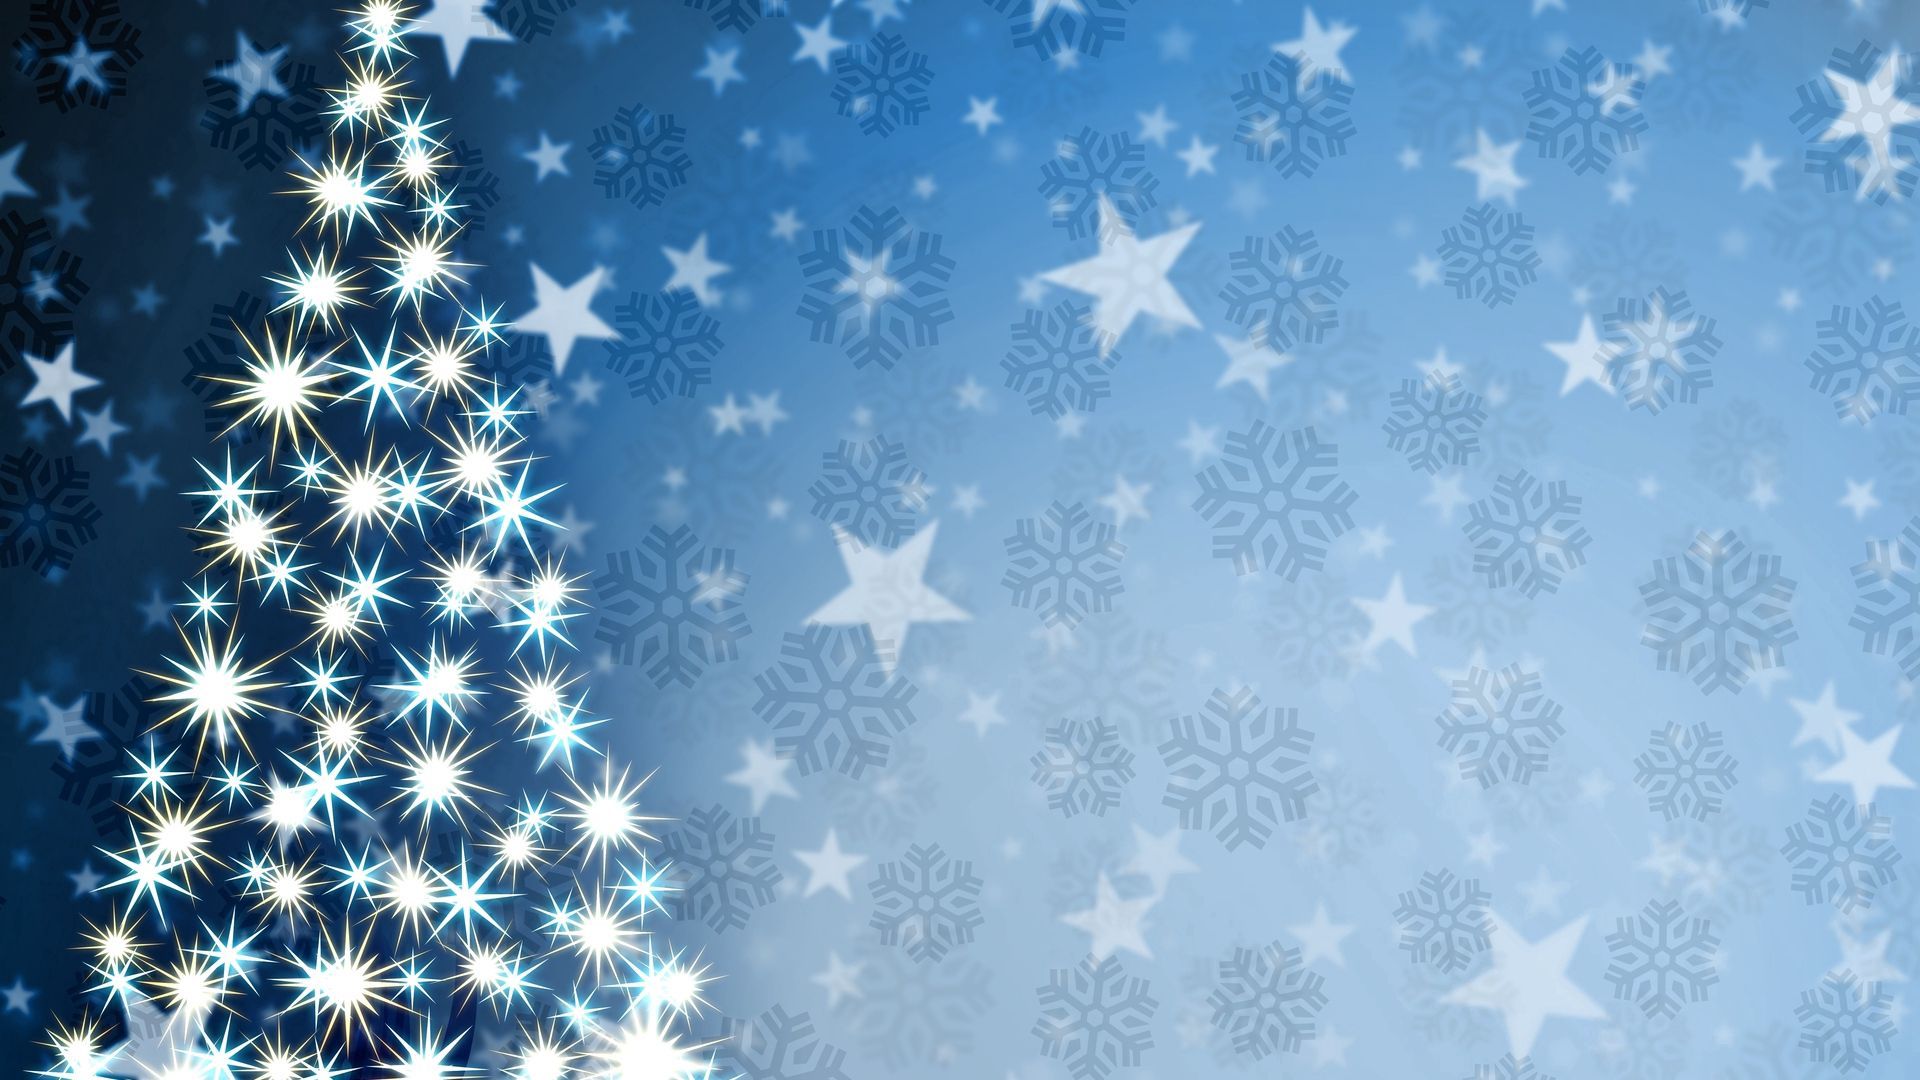 Download wallpaper 1920x1080 christmas tree, star, pattern, background HD background